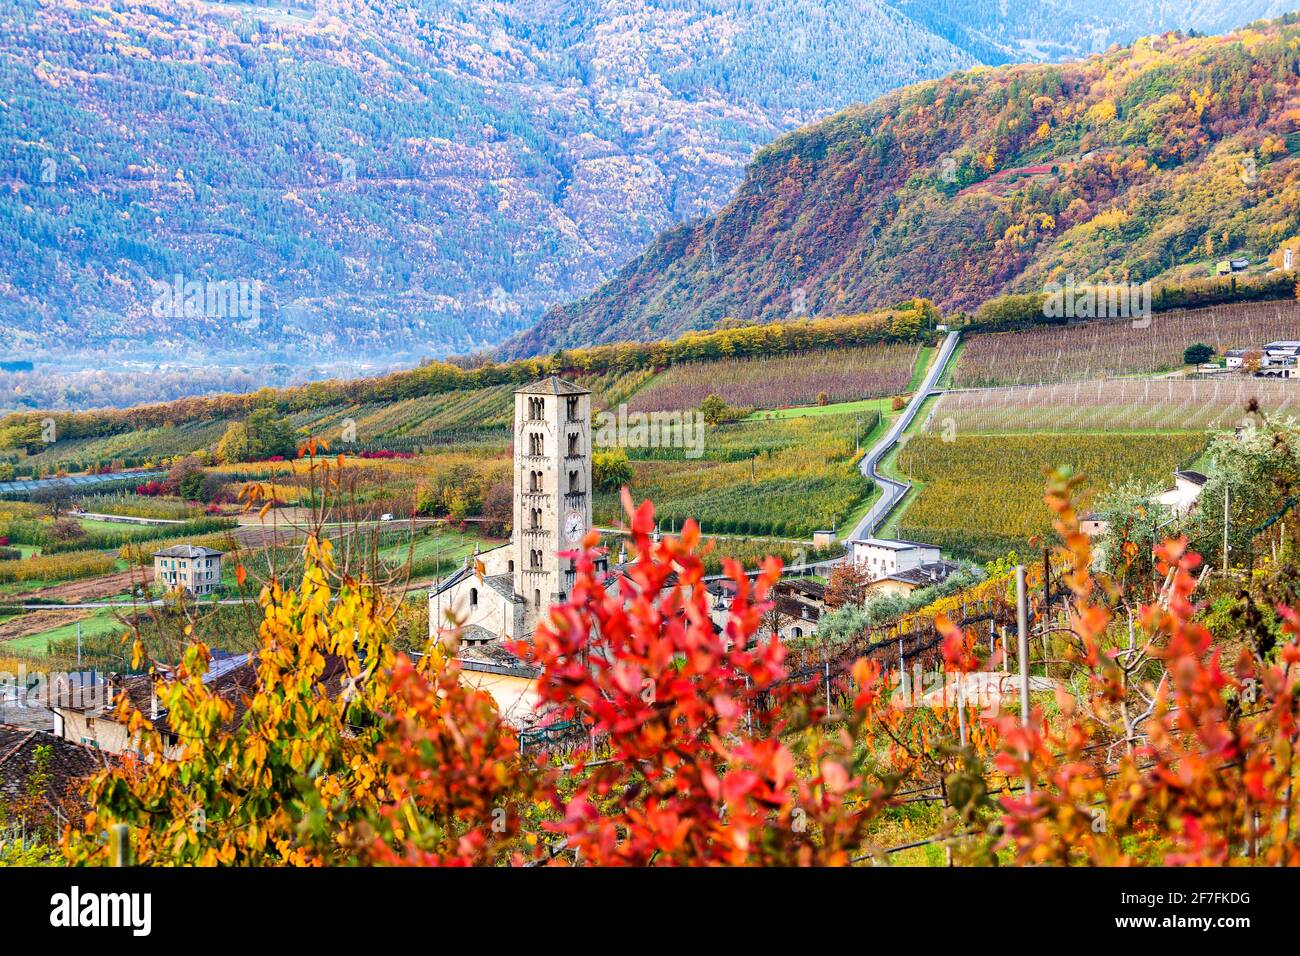 Rural church in the vineyards and apple orchards, Valtellina, Lombardy, Italy, Europe Stock Photo